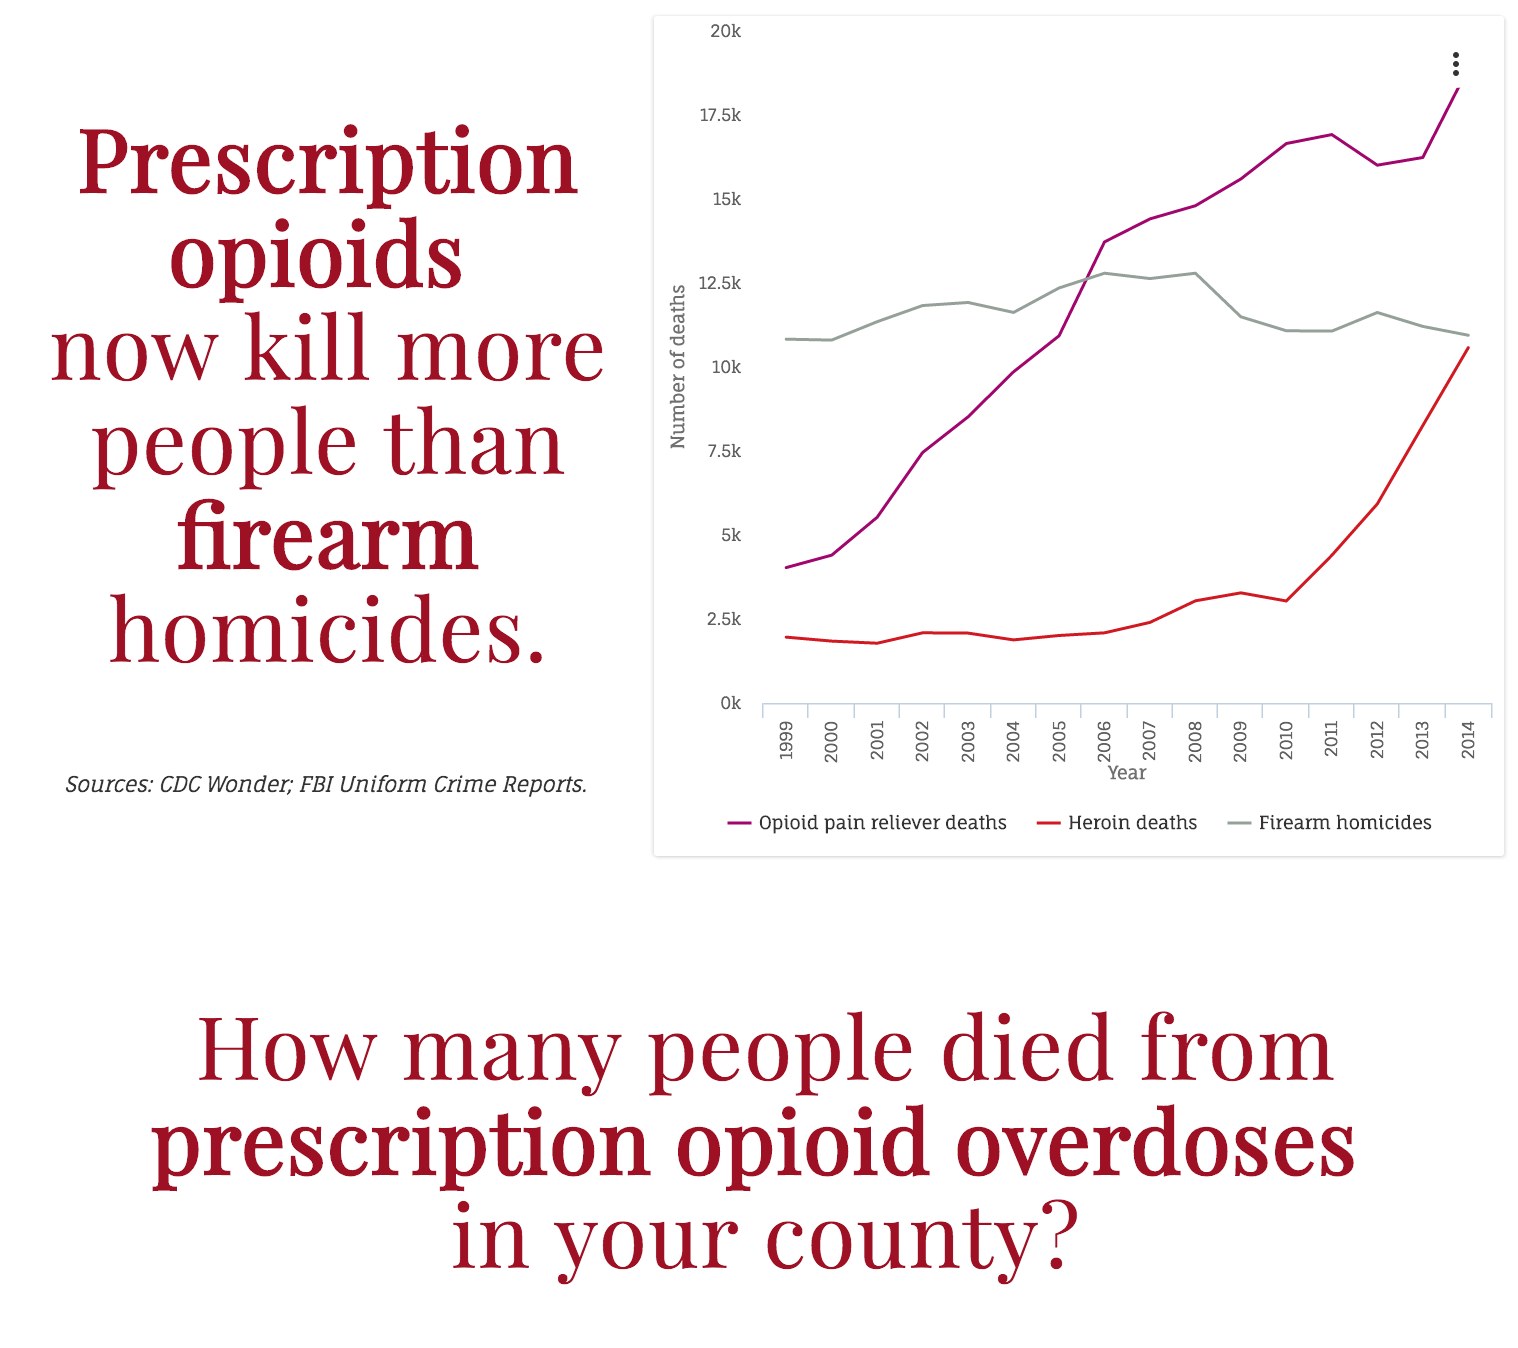 A screenshot from a "teaser" version of a local opioid safety data report.